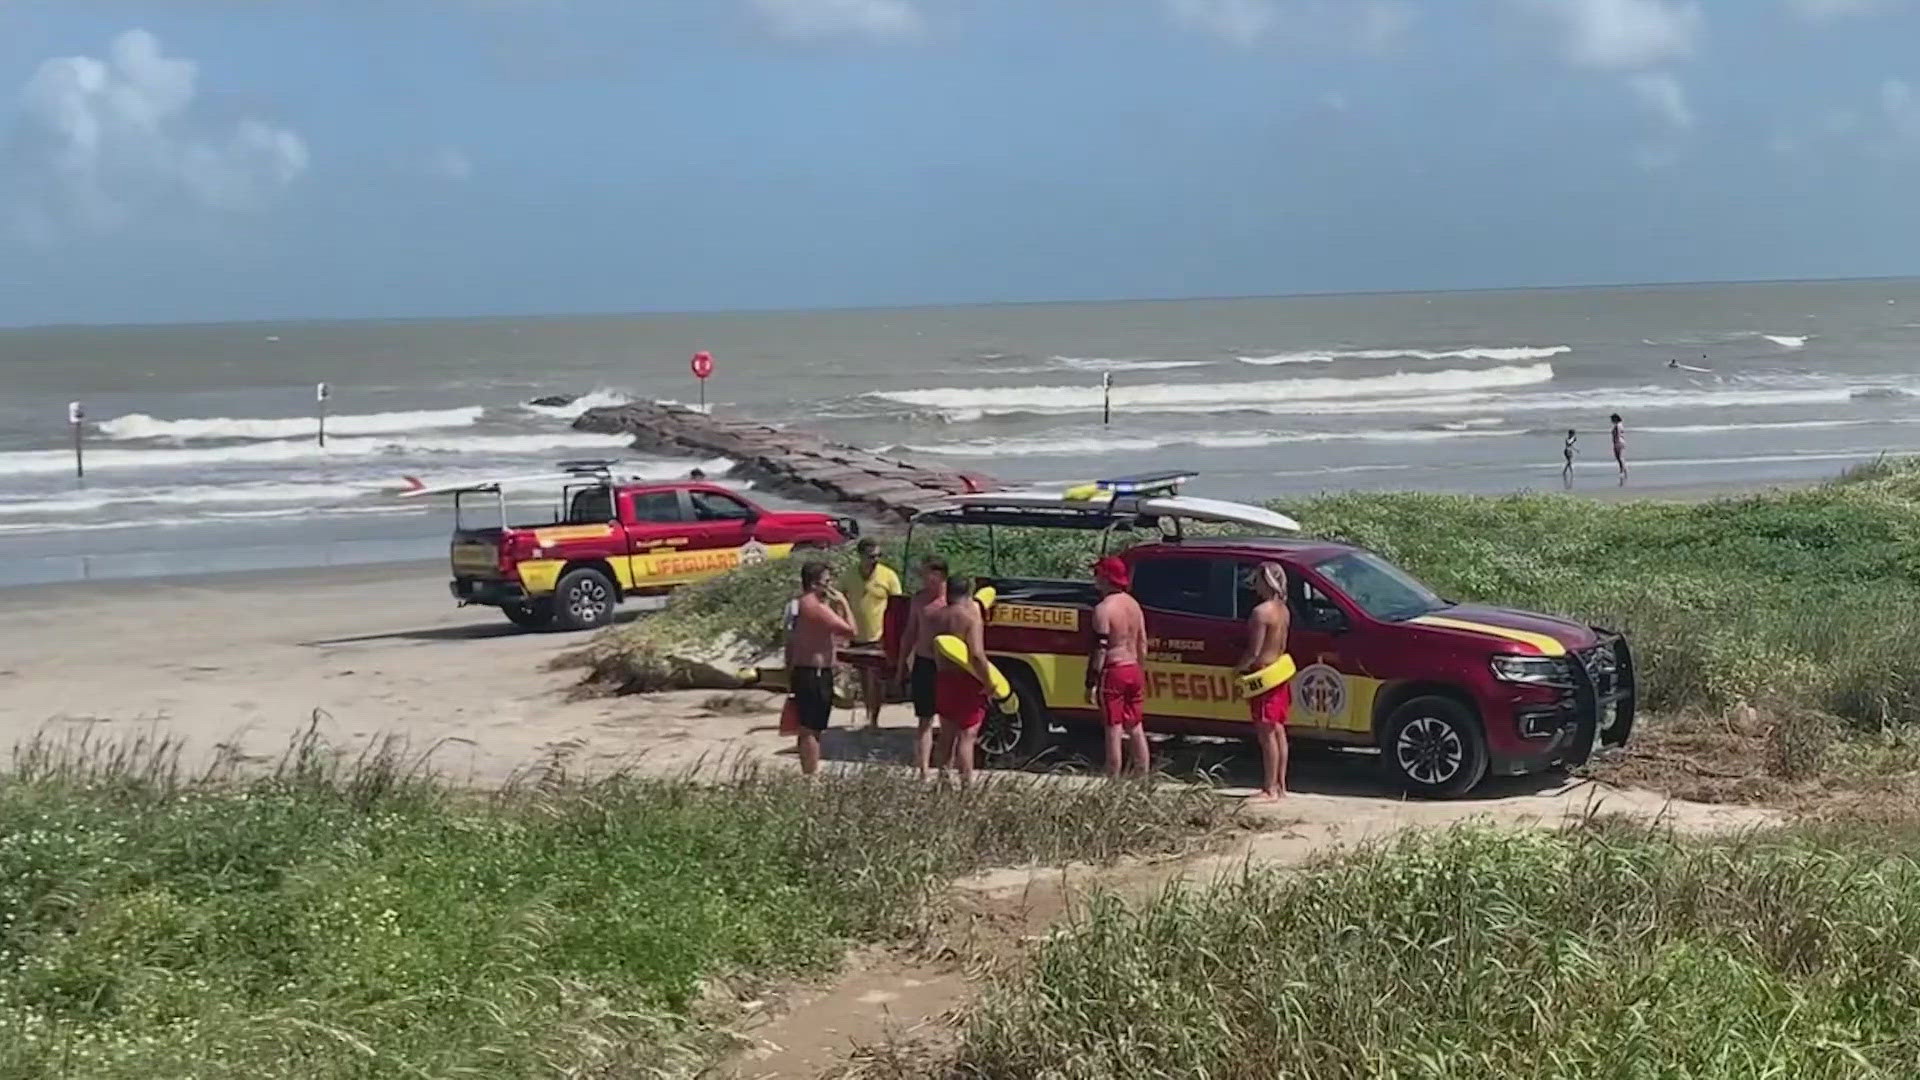 The Galveston Island Beach Patrol said the teen was pulled from the water about 30 minutes after he went into distress. He was pronounced dead about an hour later.